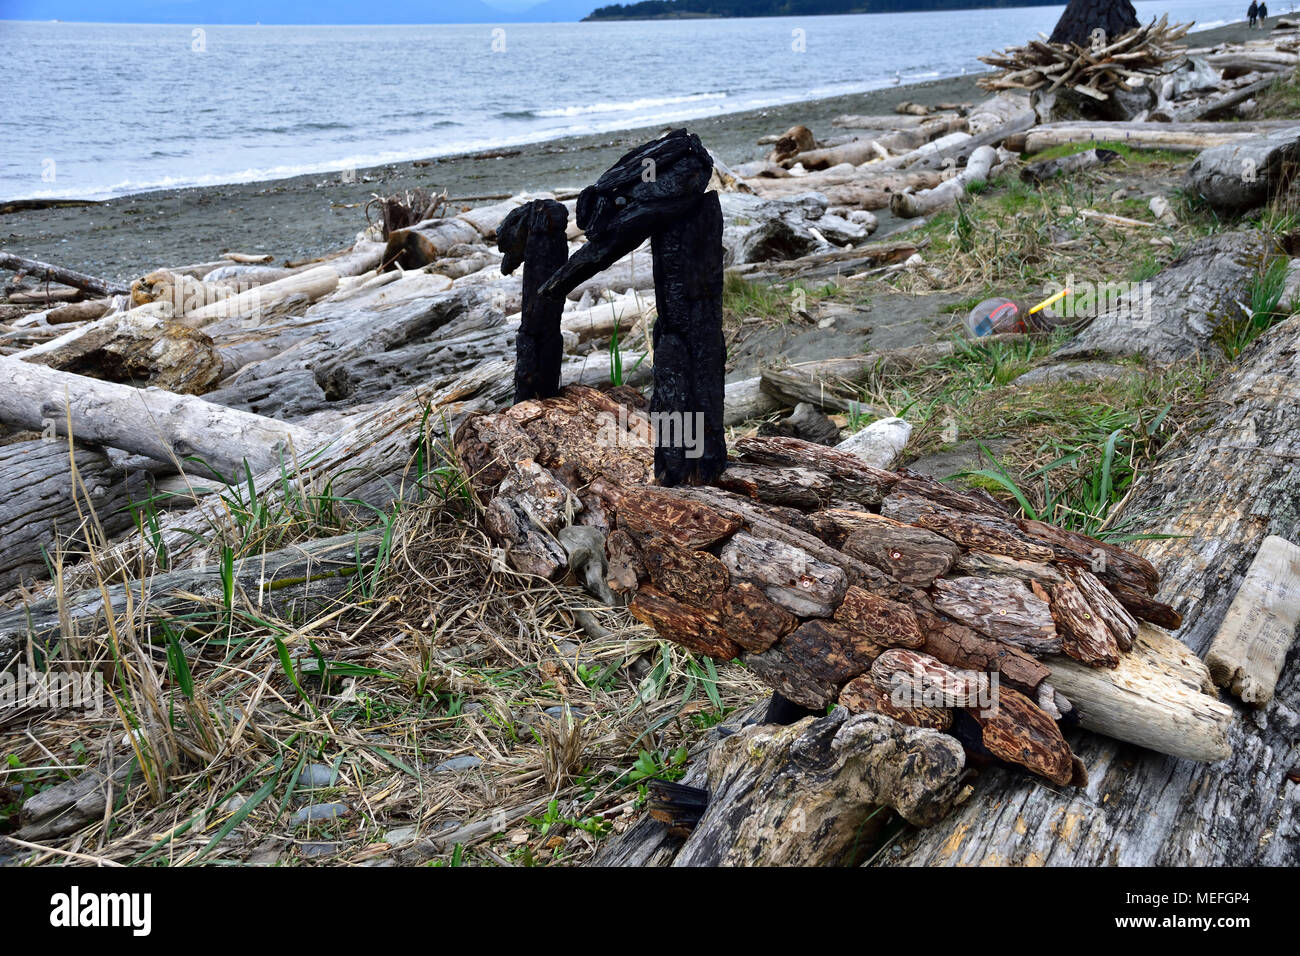 Local artists come to Esquimalt lagoon and use driftwood, sea shells and debris coming in with the tide to make fantastic pieces of public art. Stock Photo